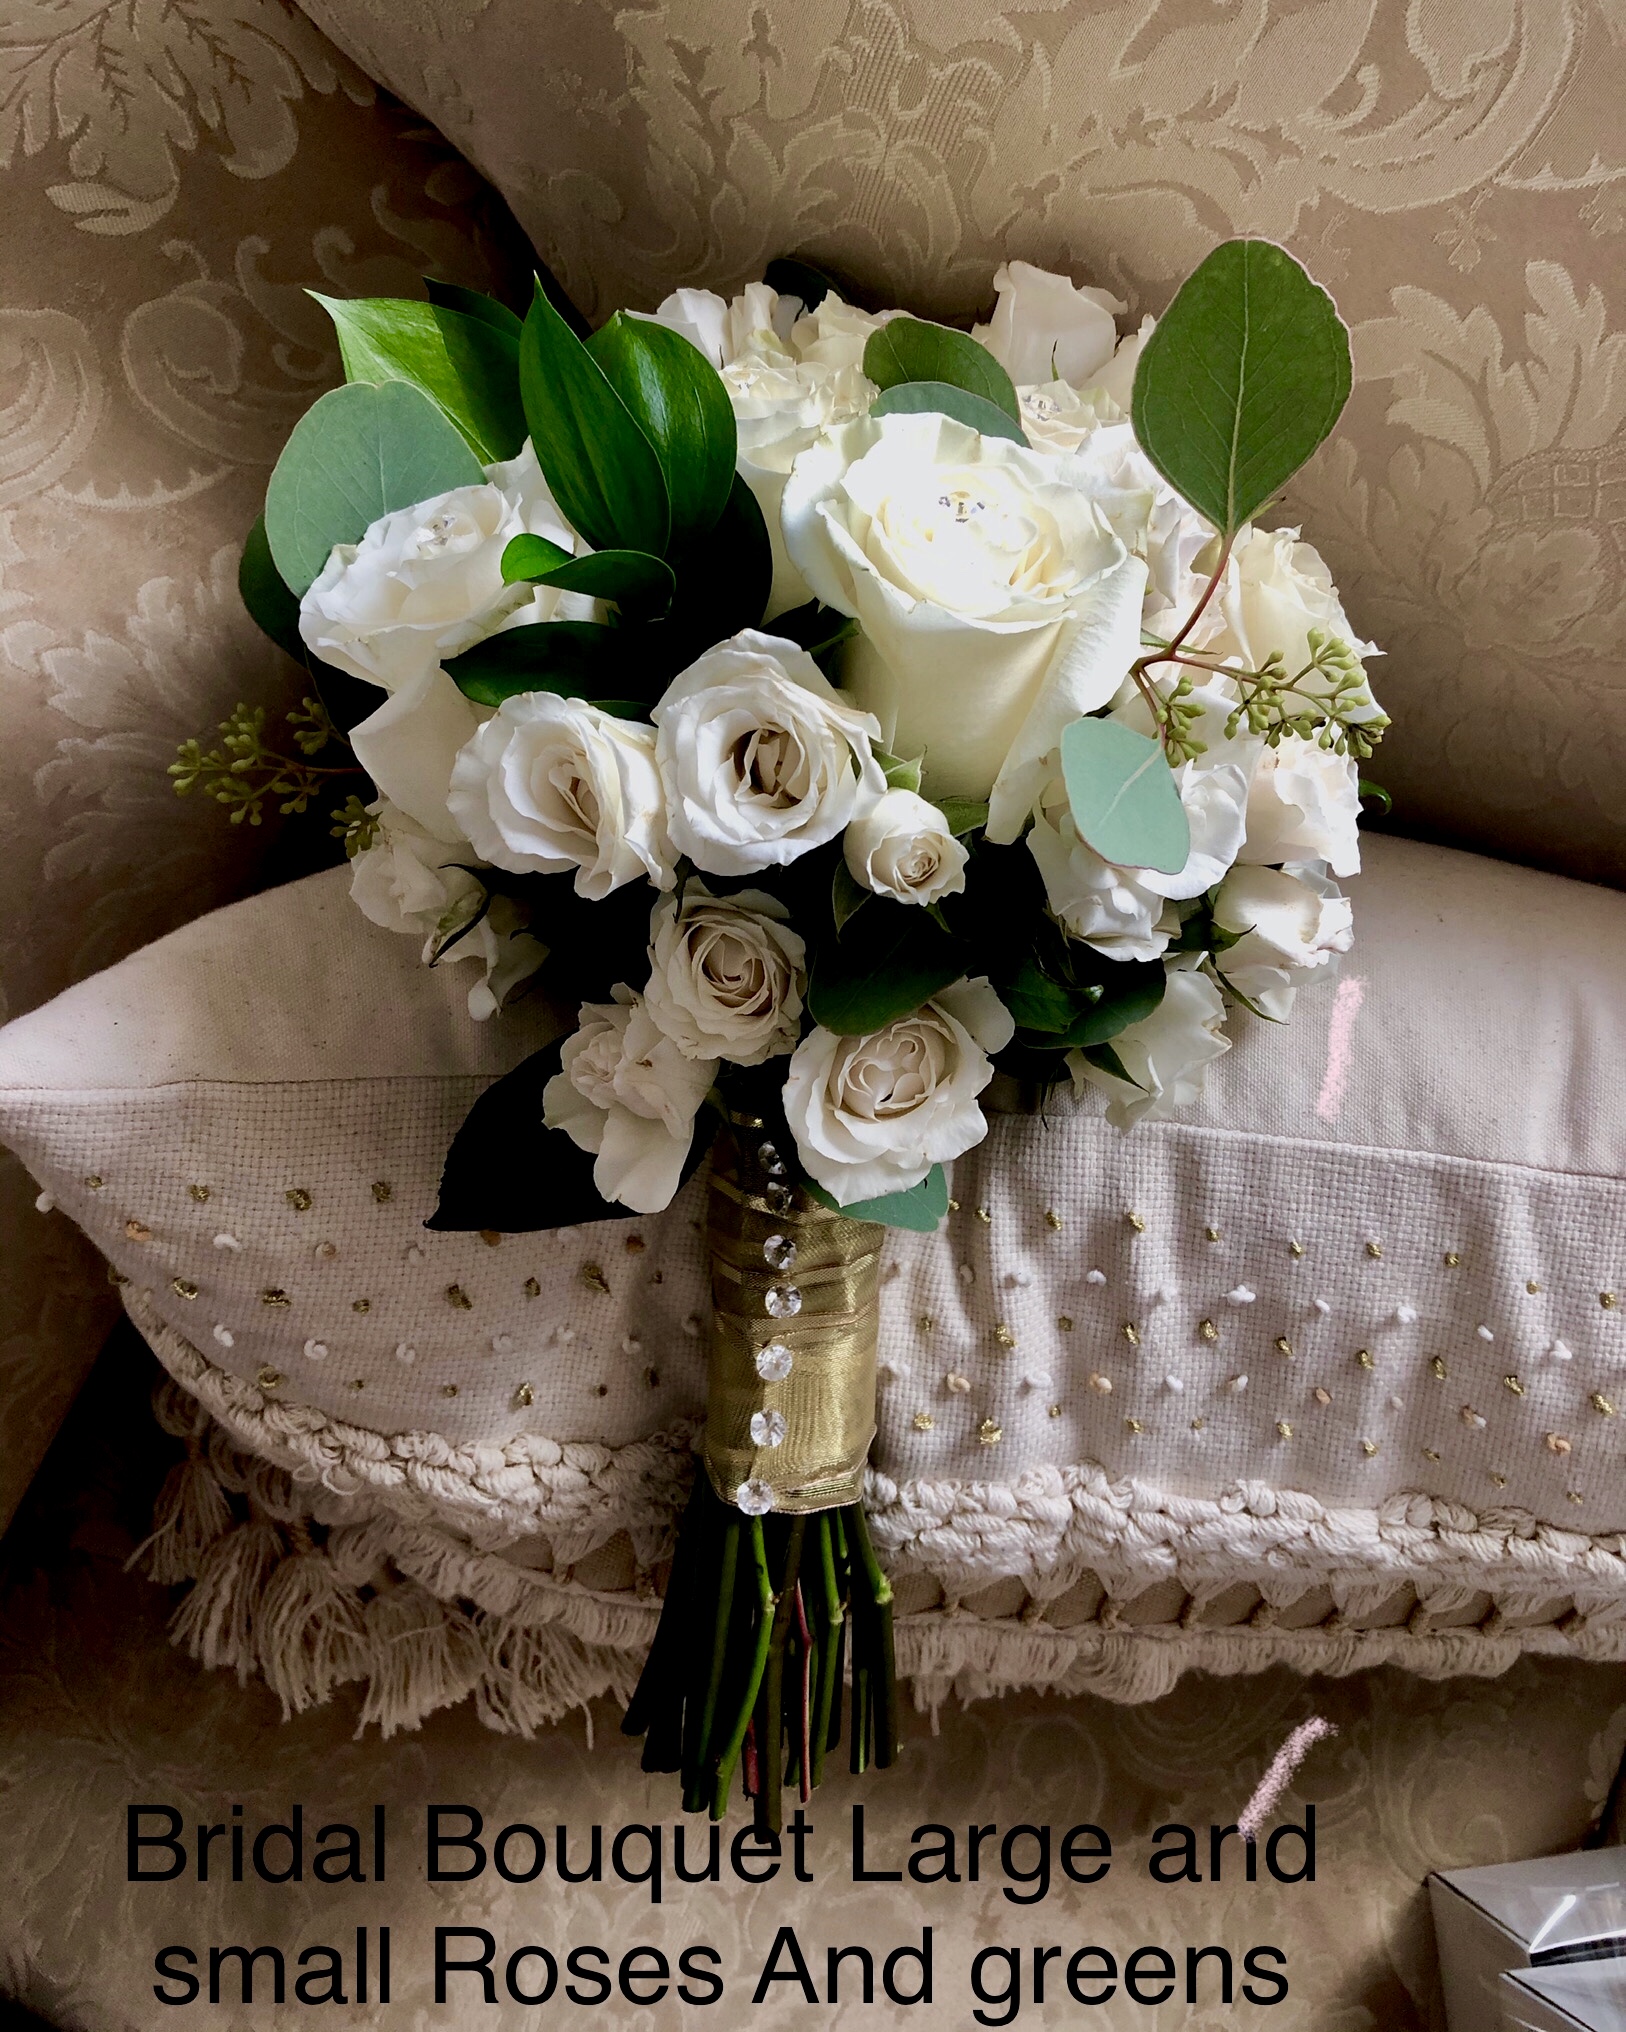 $135 Bridal Bouquet Large / Small Roses /Greens                                                               